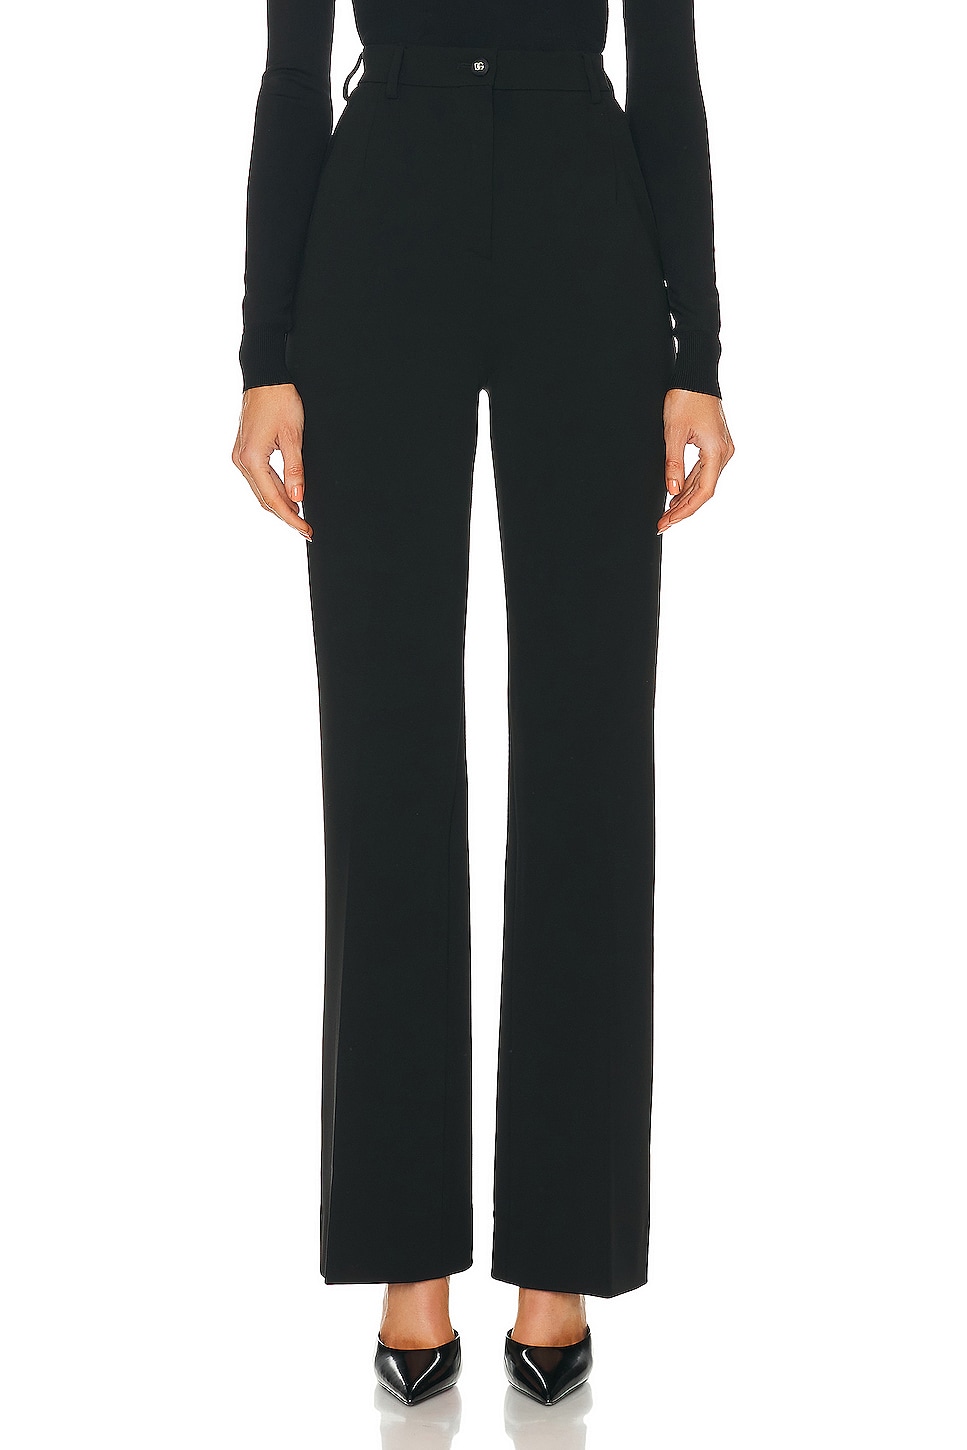 Image 1 of Dolce & Gabbana Flared Pants in Nero